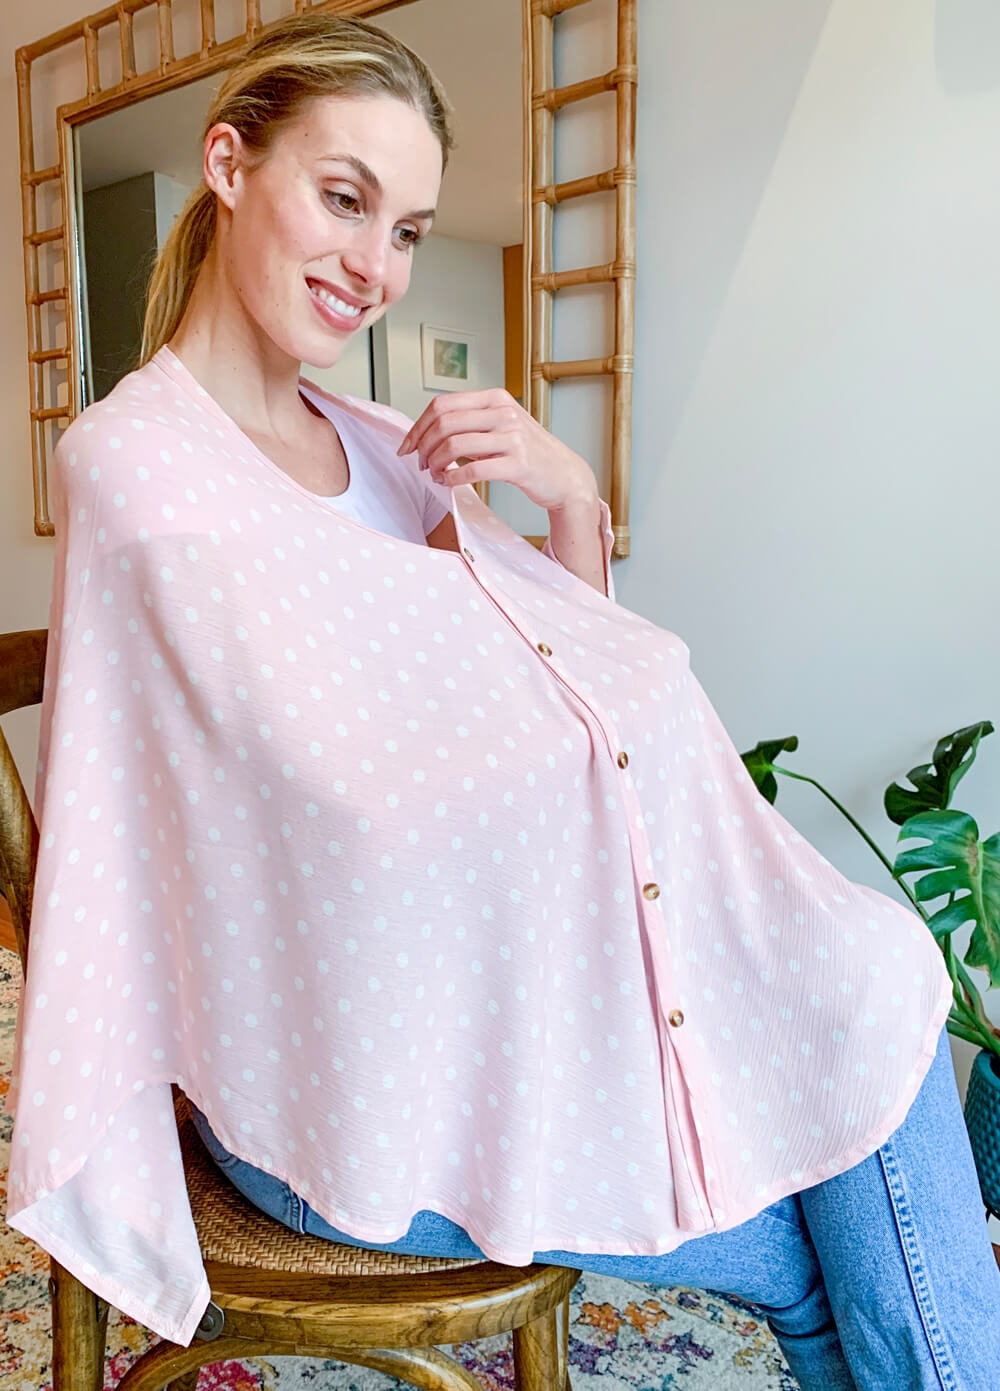 Lait & Co - Nursing Couverture in Pink Polkadot | Queen Bee